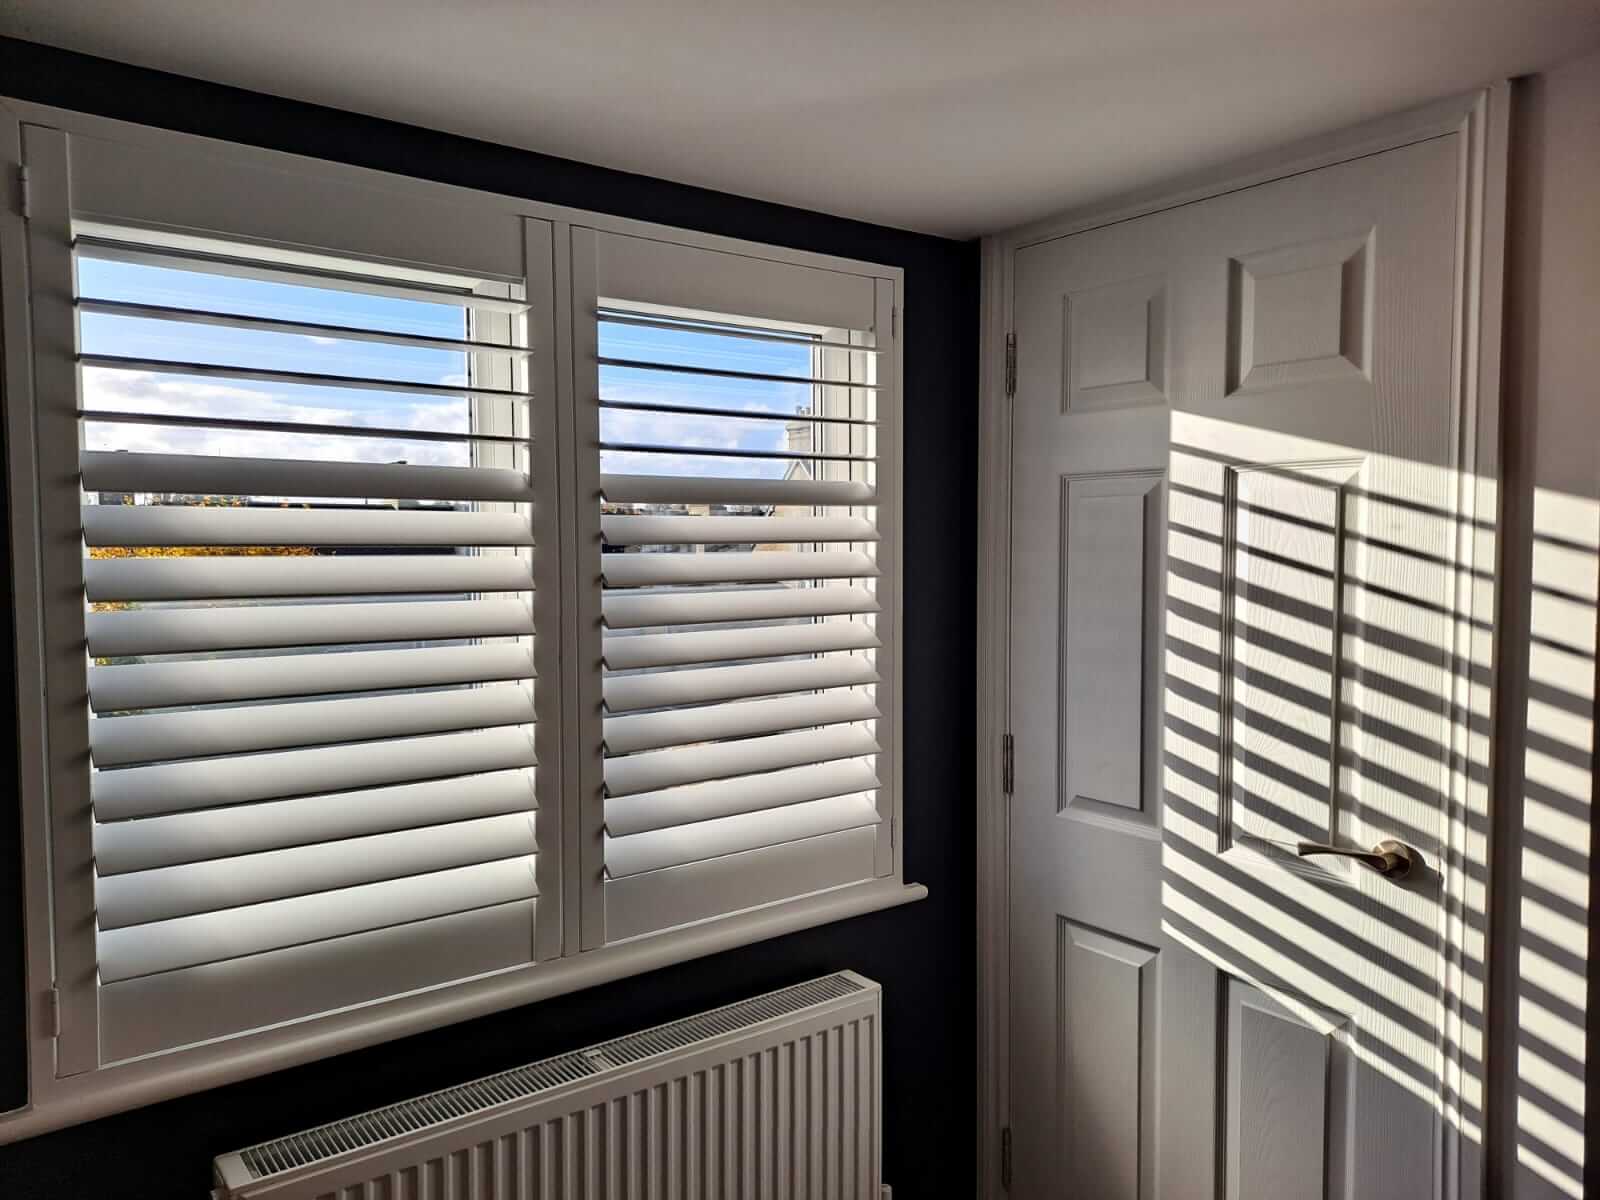 Bedford window shutter full height pure white reflection